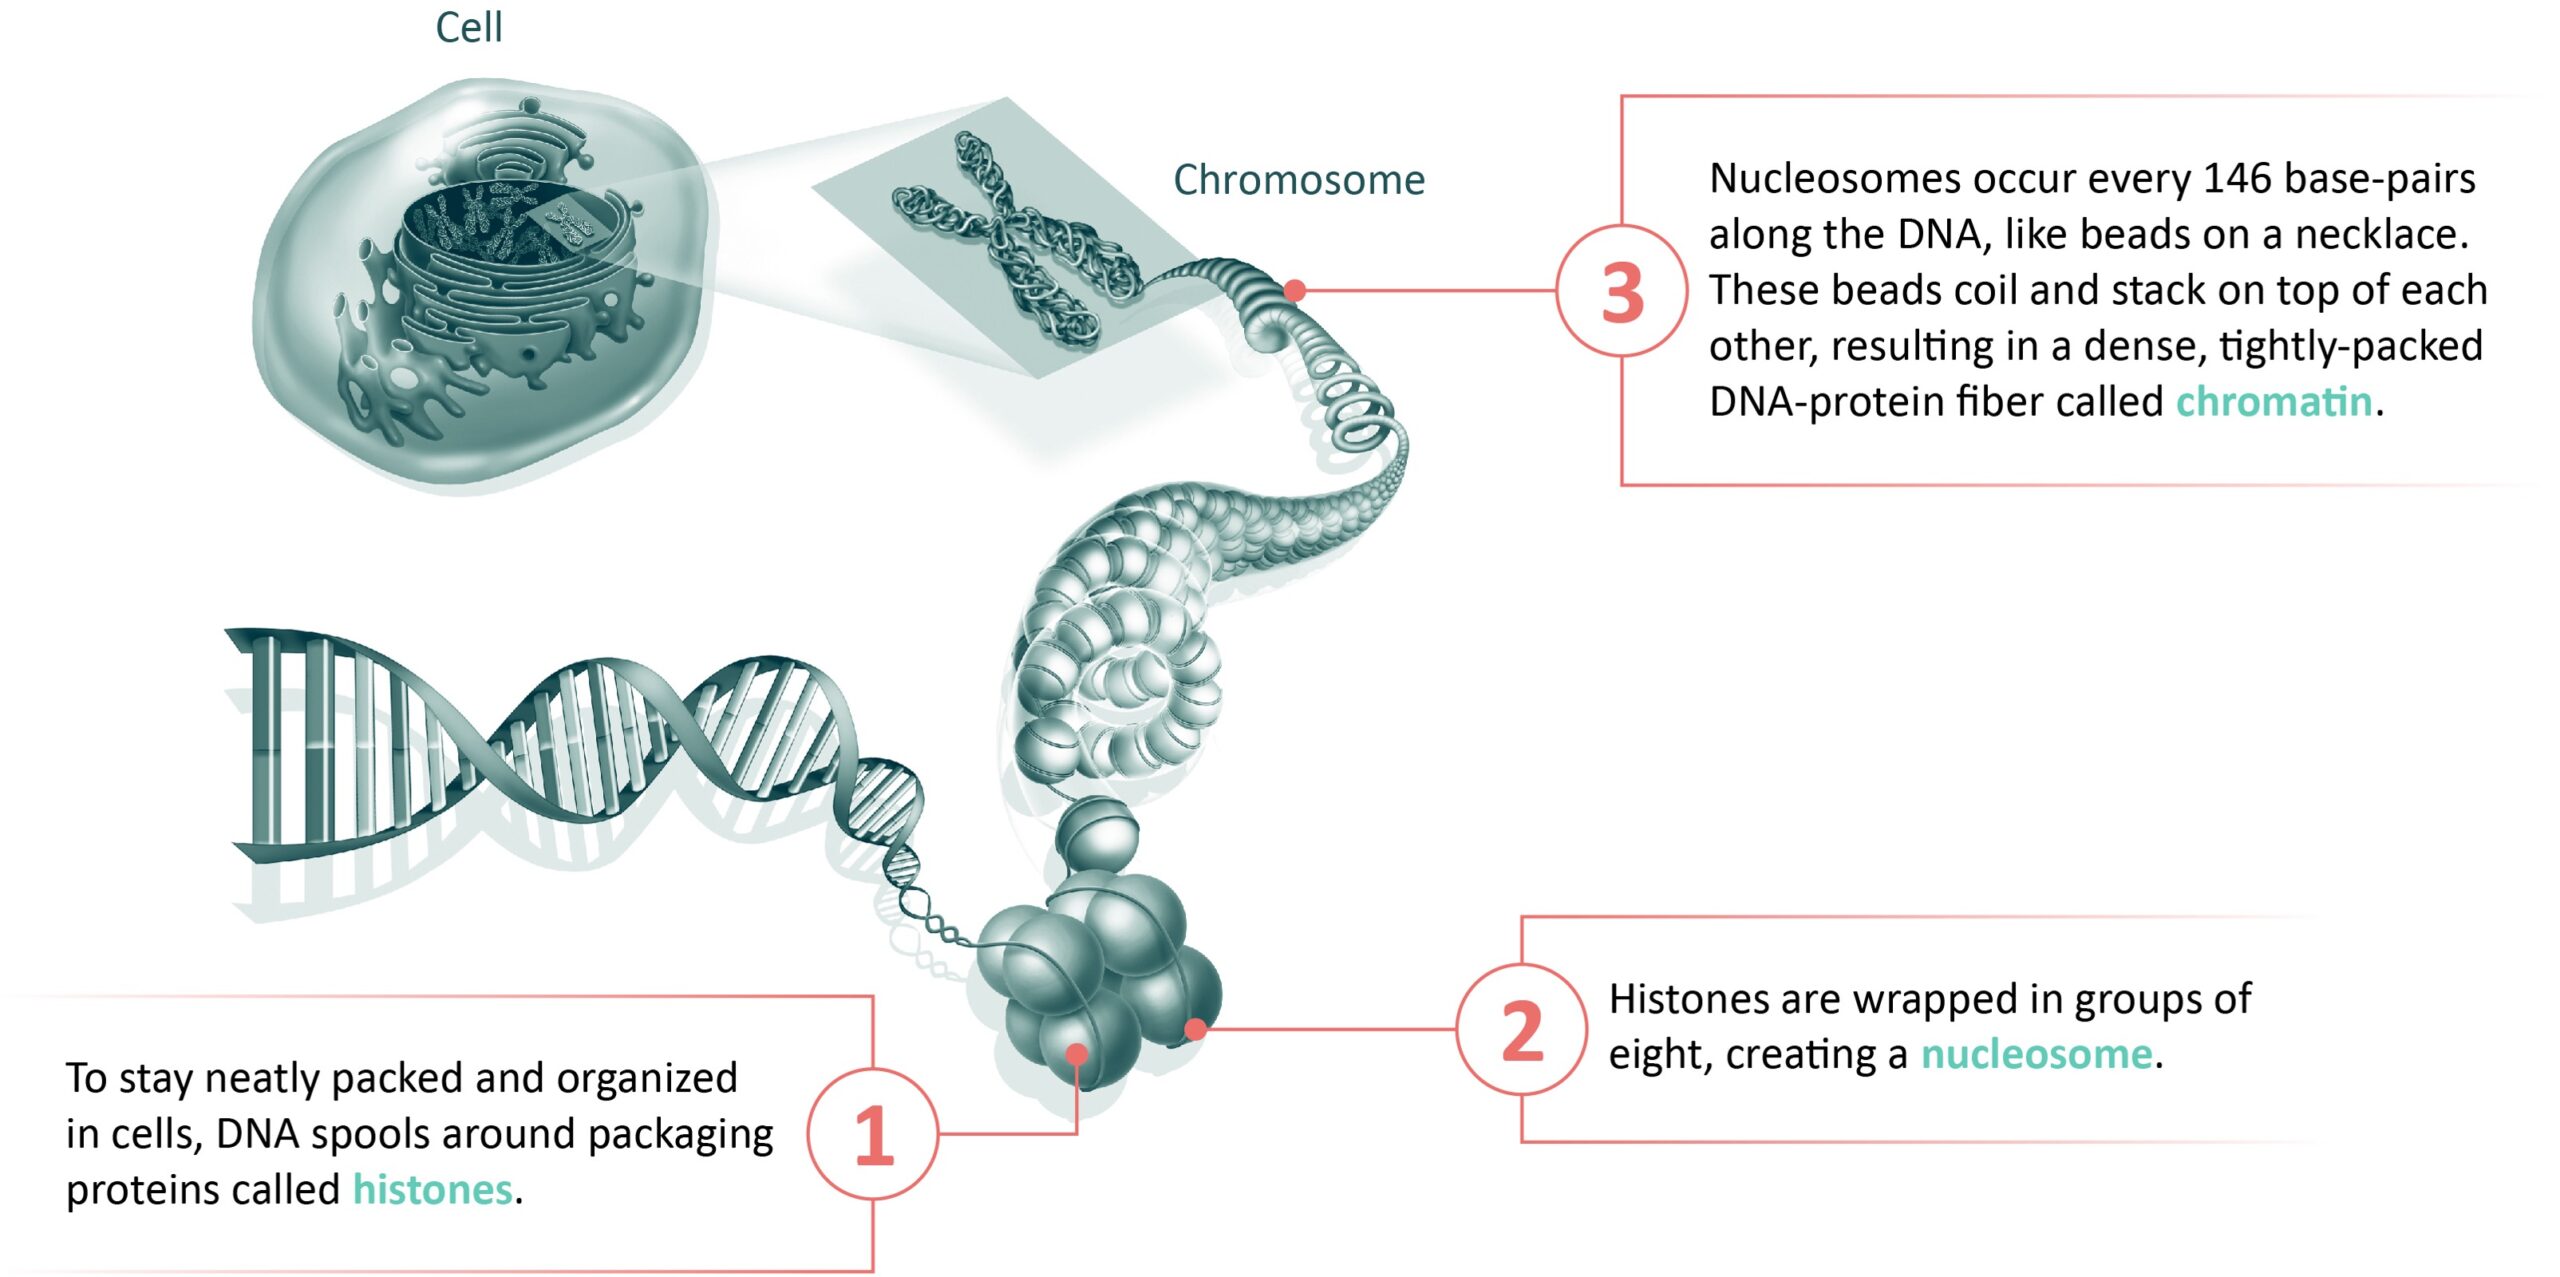 The epigenome is made of histones, chromatin, and other marks and mechanisms, and refers to the dynamic packaging and organization of DNA within human cells across the genome